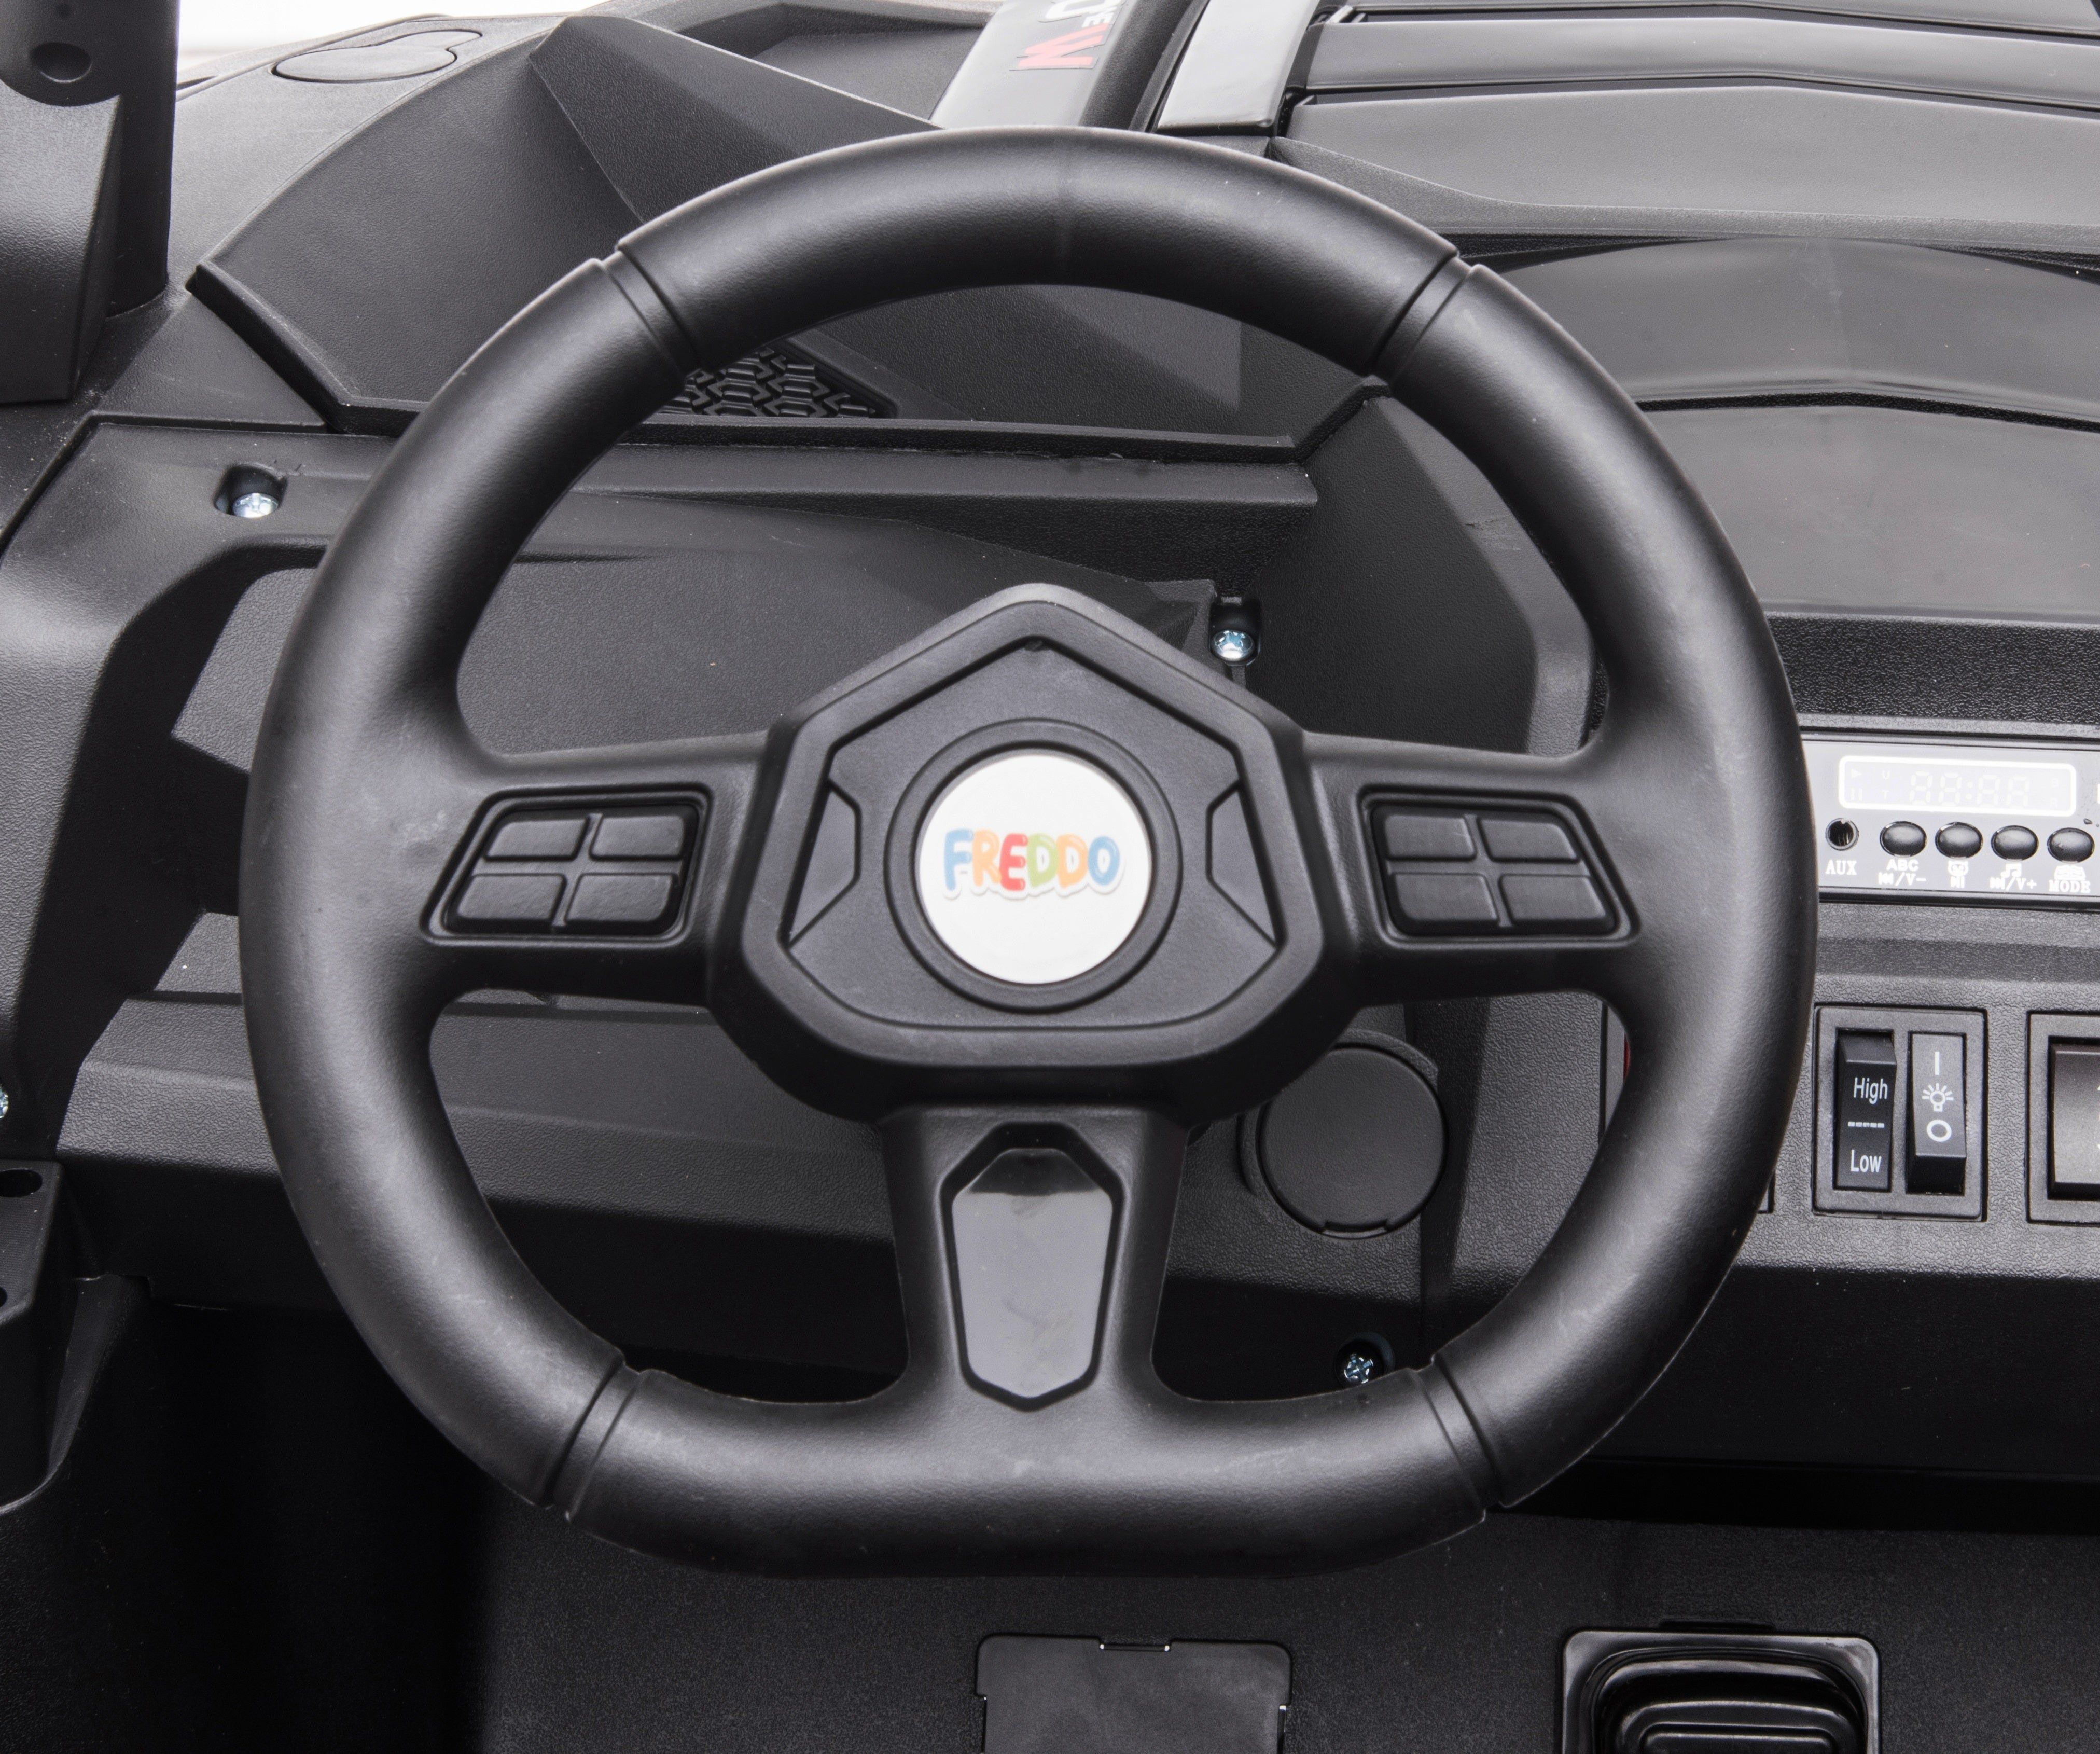 Compatible Steering Wheel for Ride on Cars Kids Cars CA - Ride On Toys Store